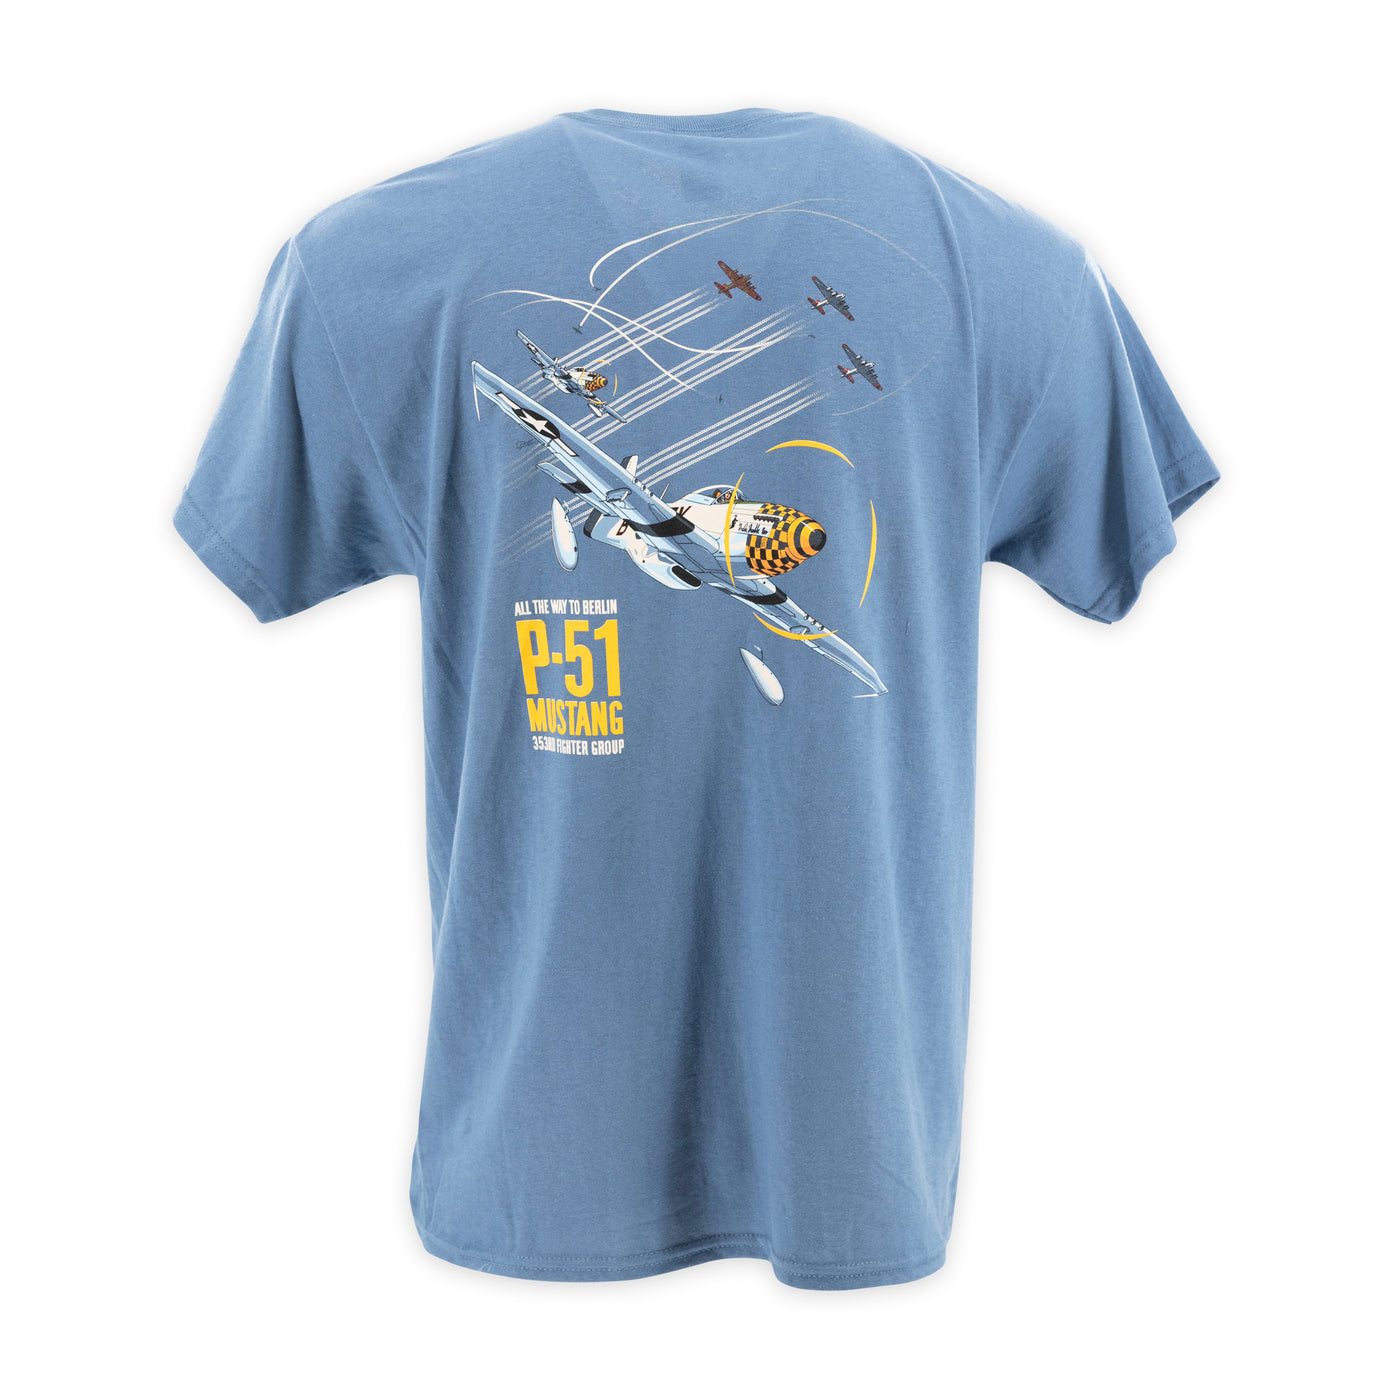 P-51 Double Trouble Two T-Shirt